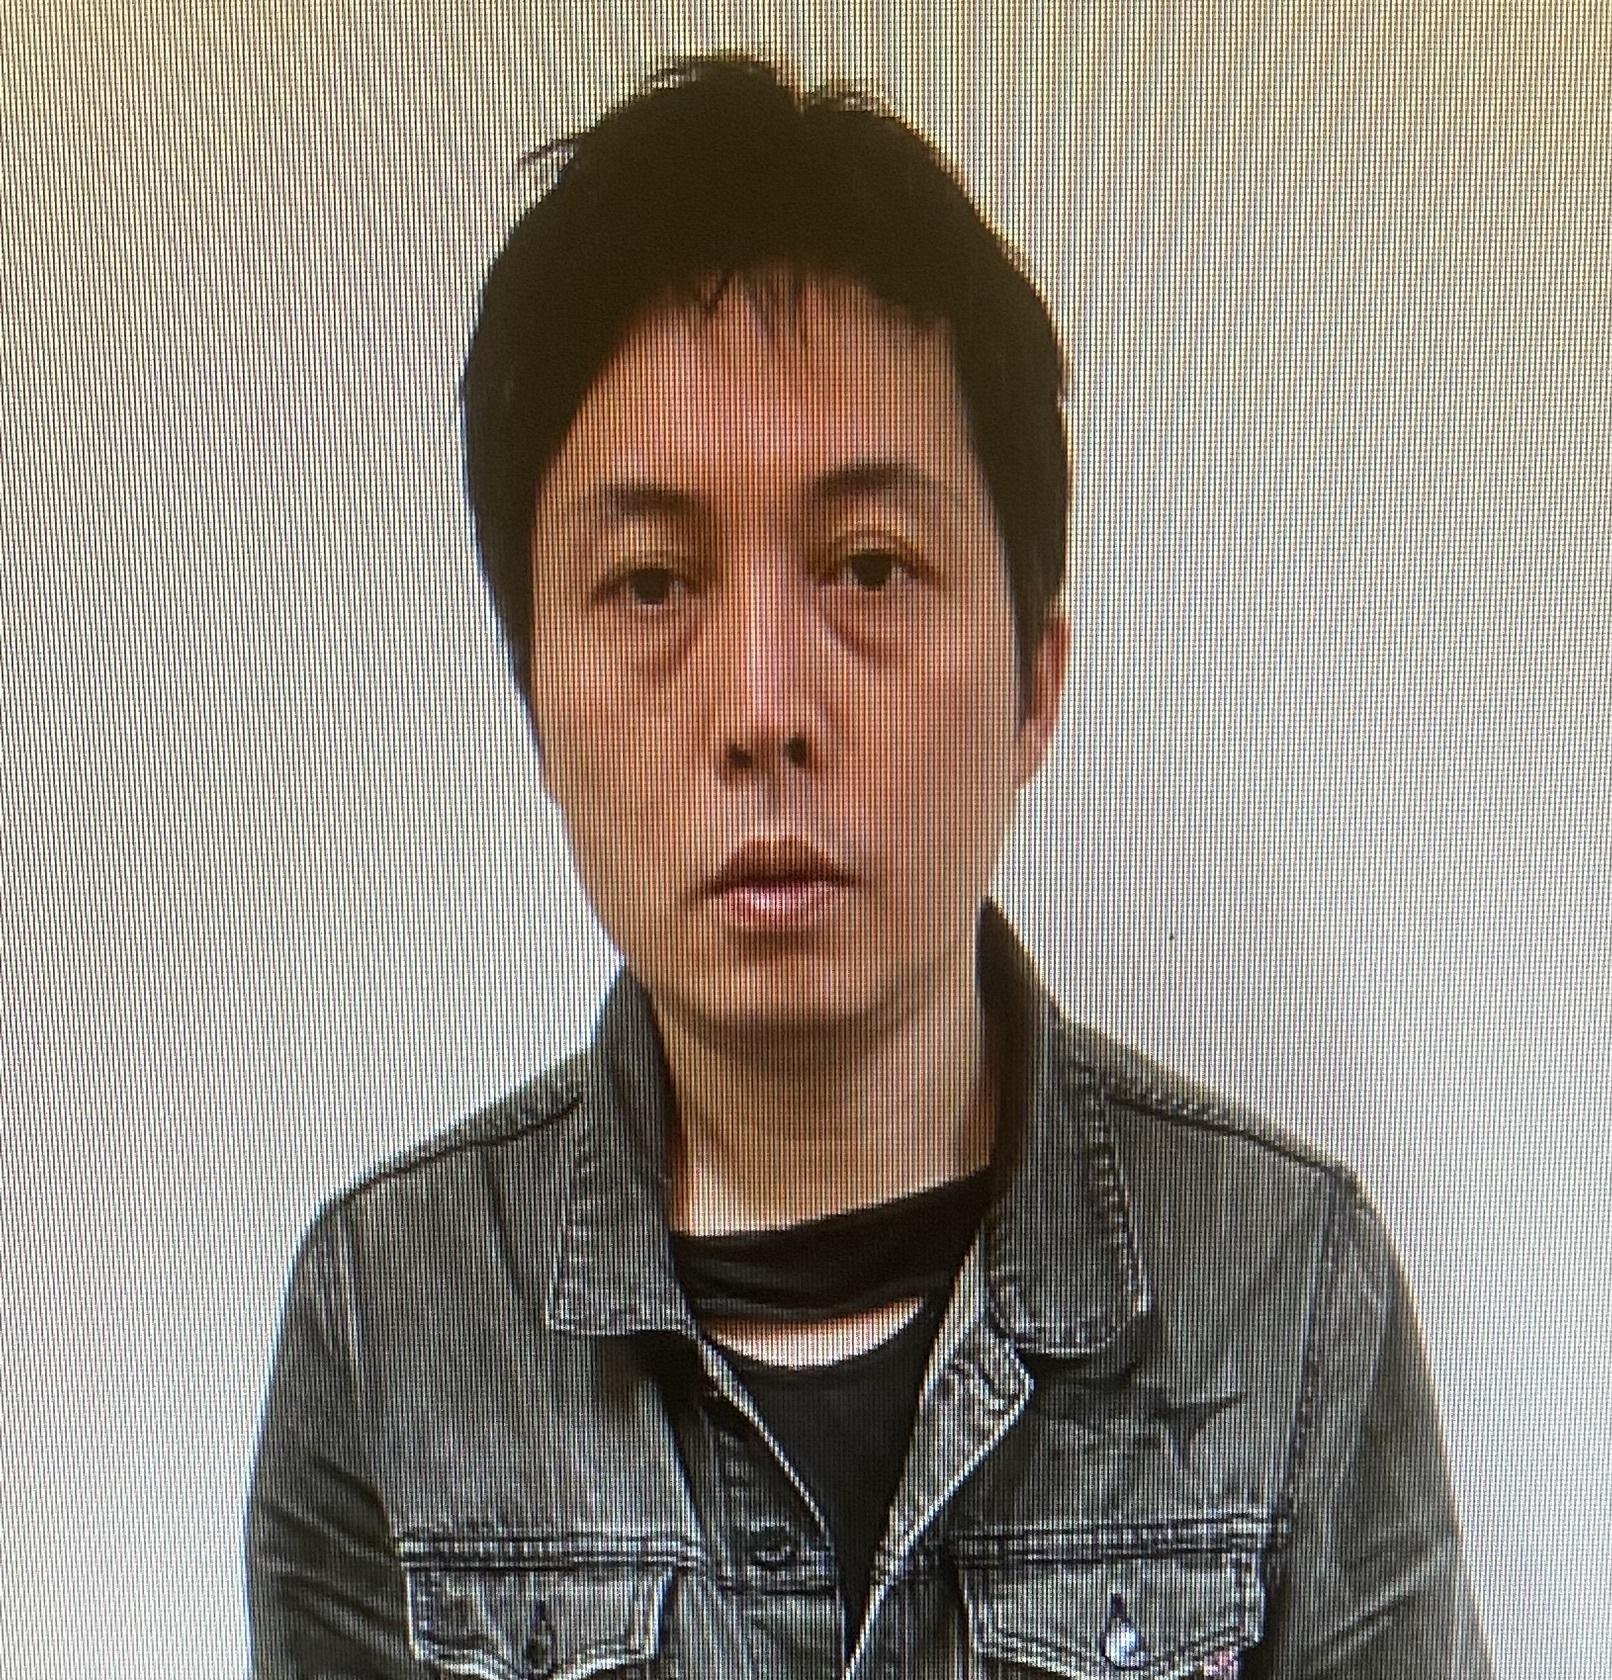 Tsui Sze-yuen Comwillian, aged 50, is about 1.73 metres tall, 70 kilograms in weight and of medium build. He has a round face with yellow complexion and short black hair. He was last seen wearing a black and red coat, blue jeans and black and gray shoes.
